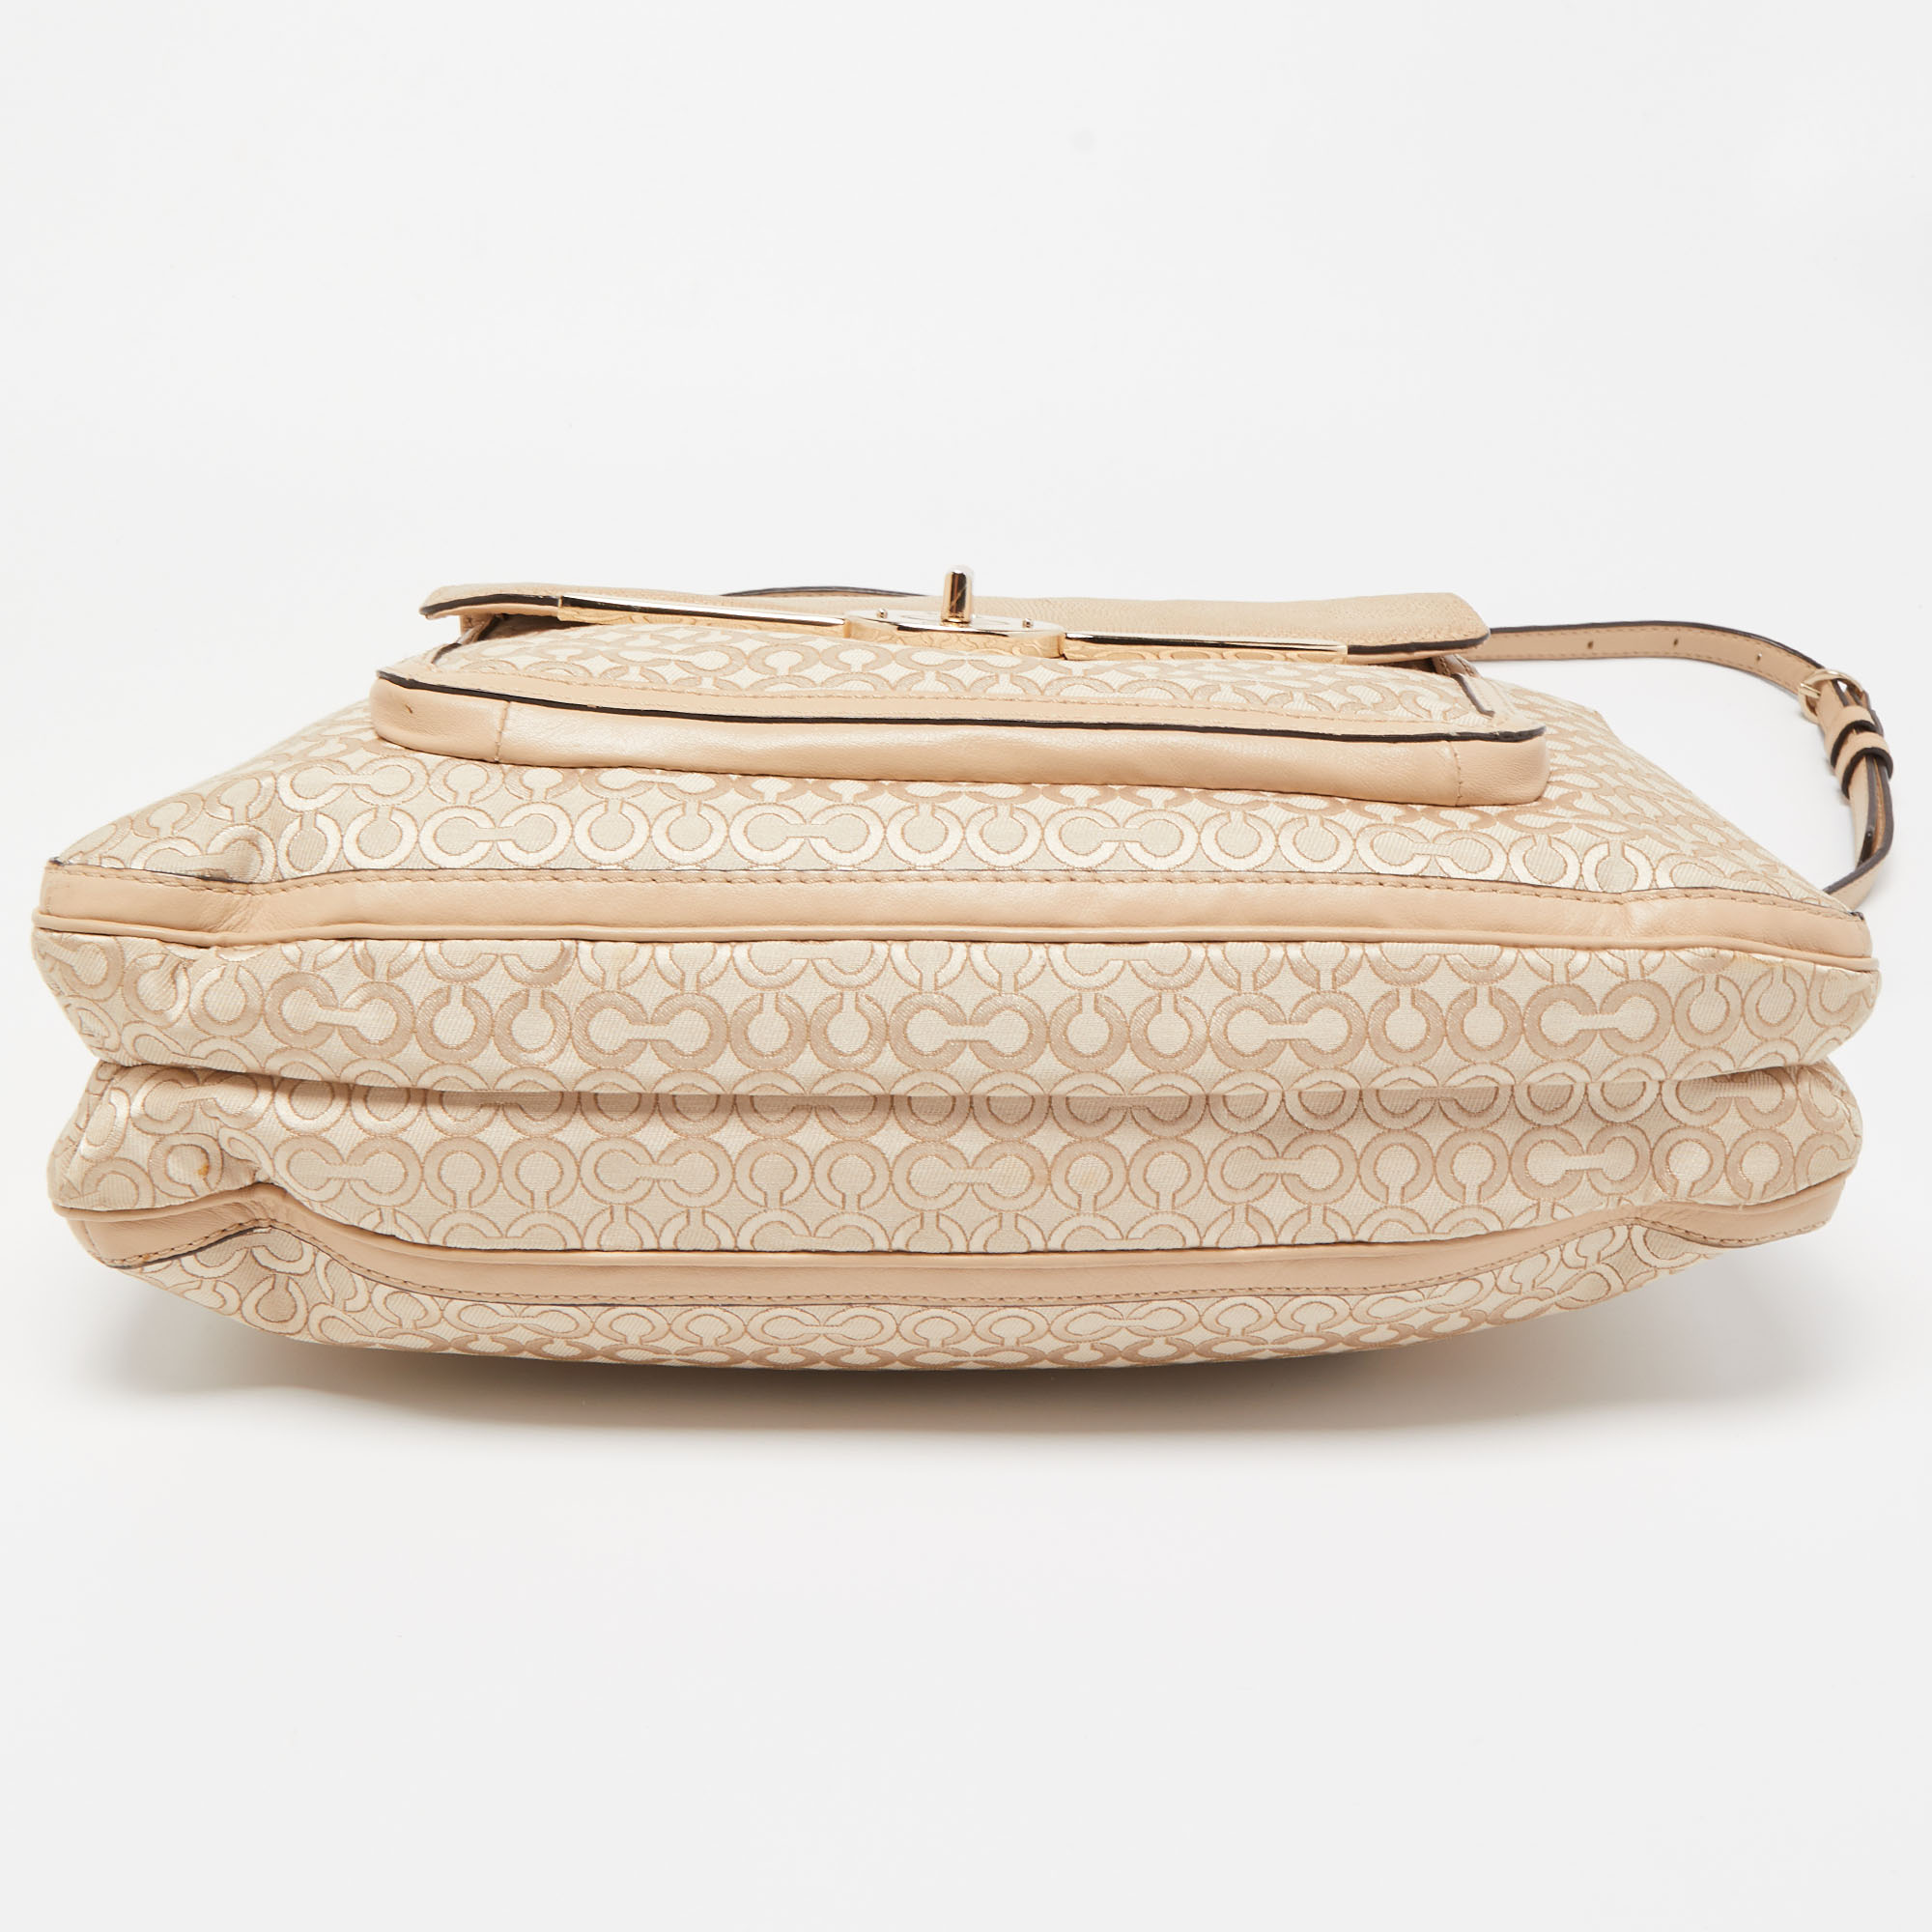 Coach Beige Op Art Fabric And Leather Madison Hobo